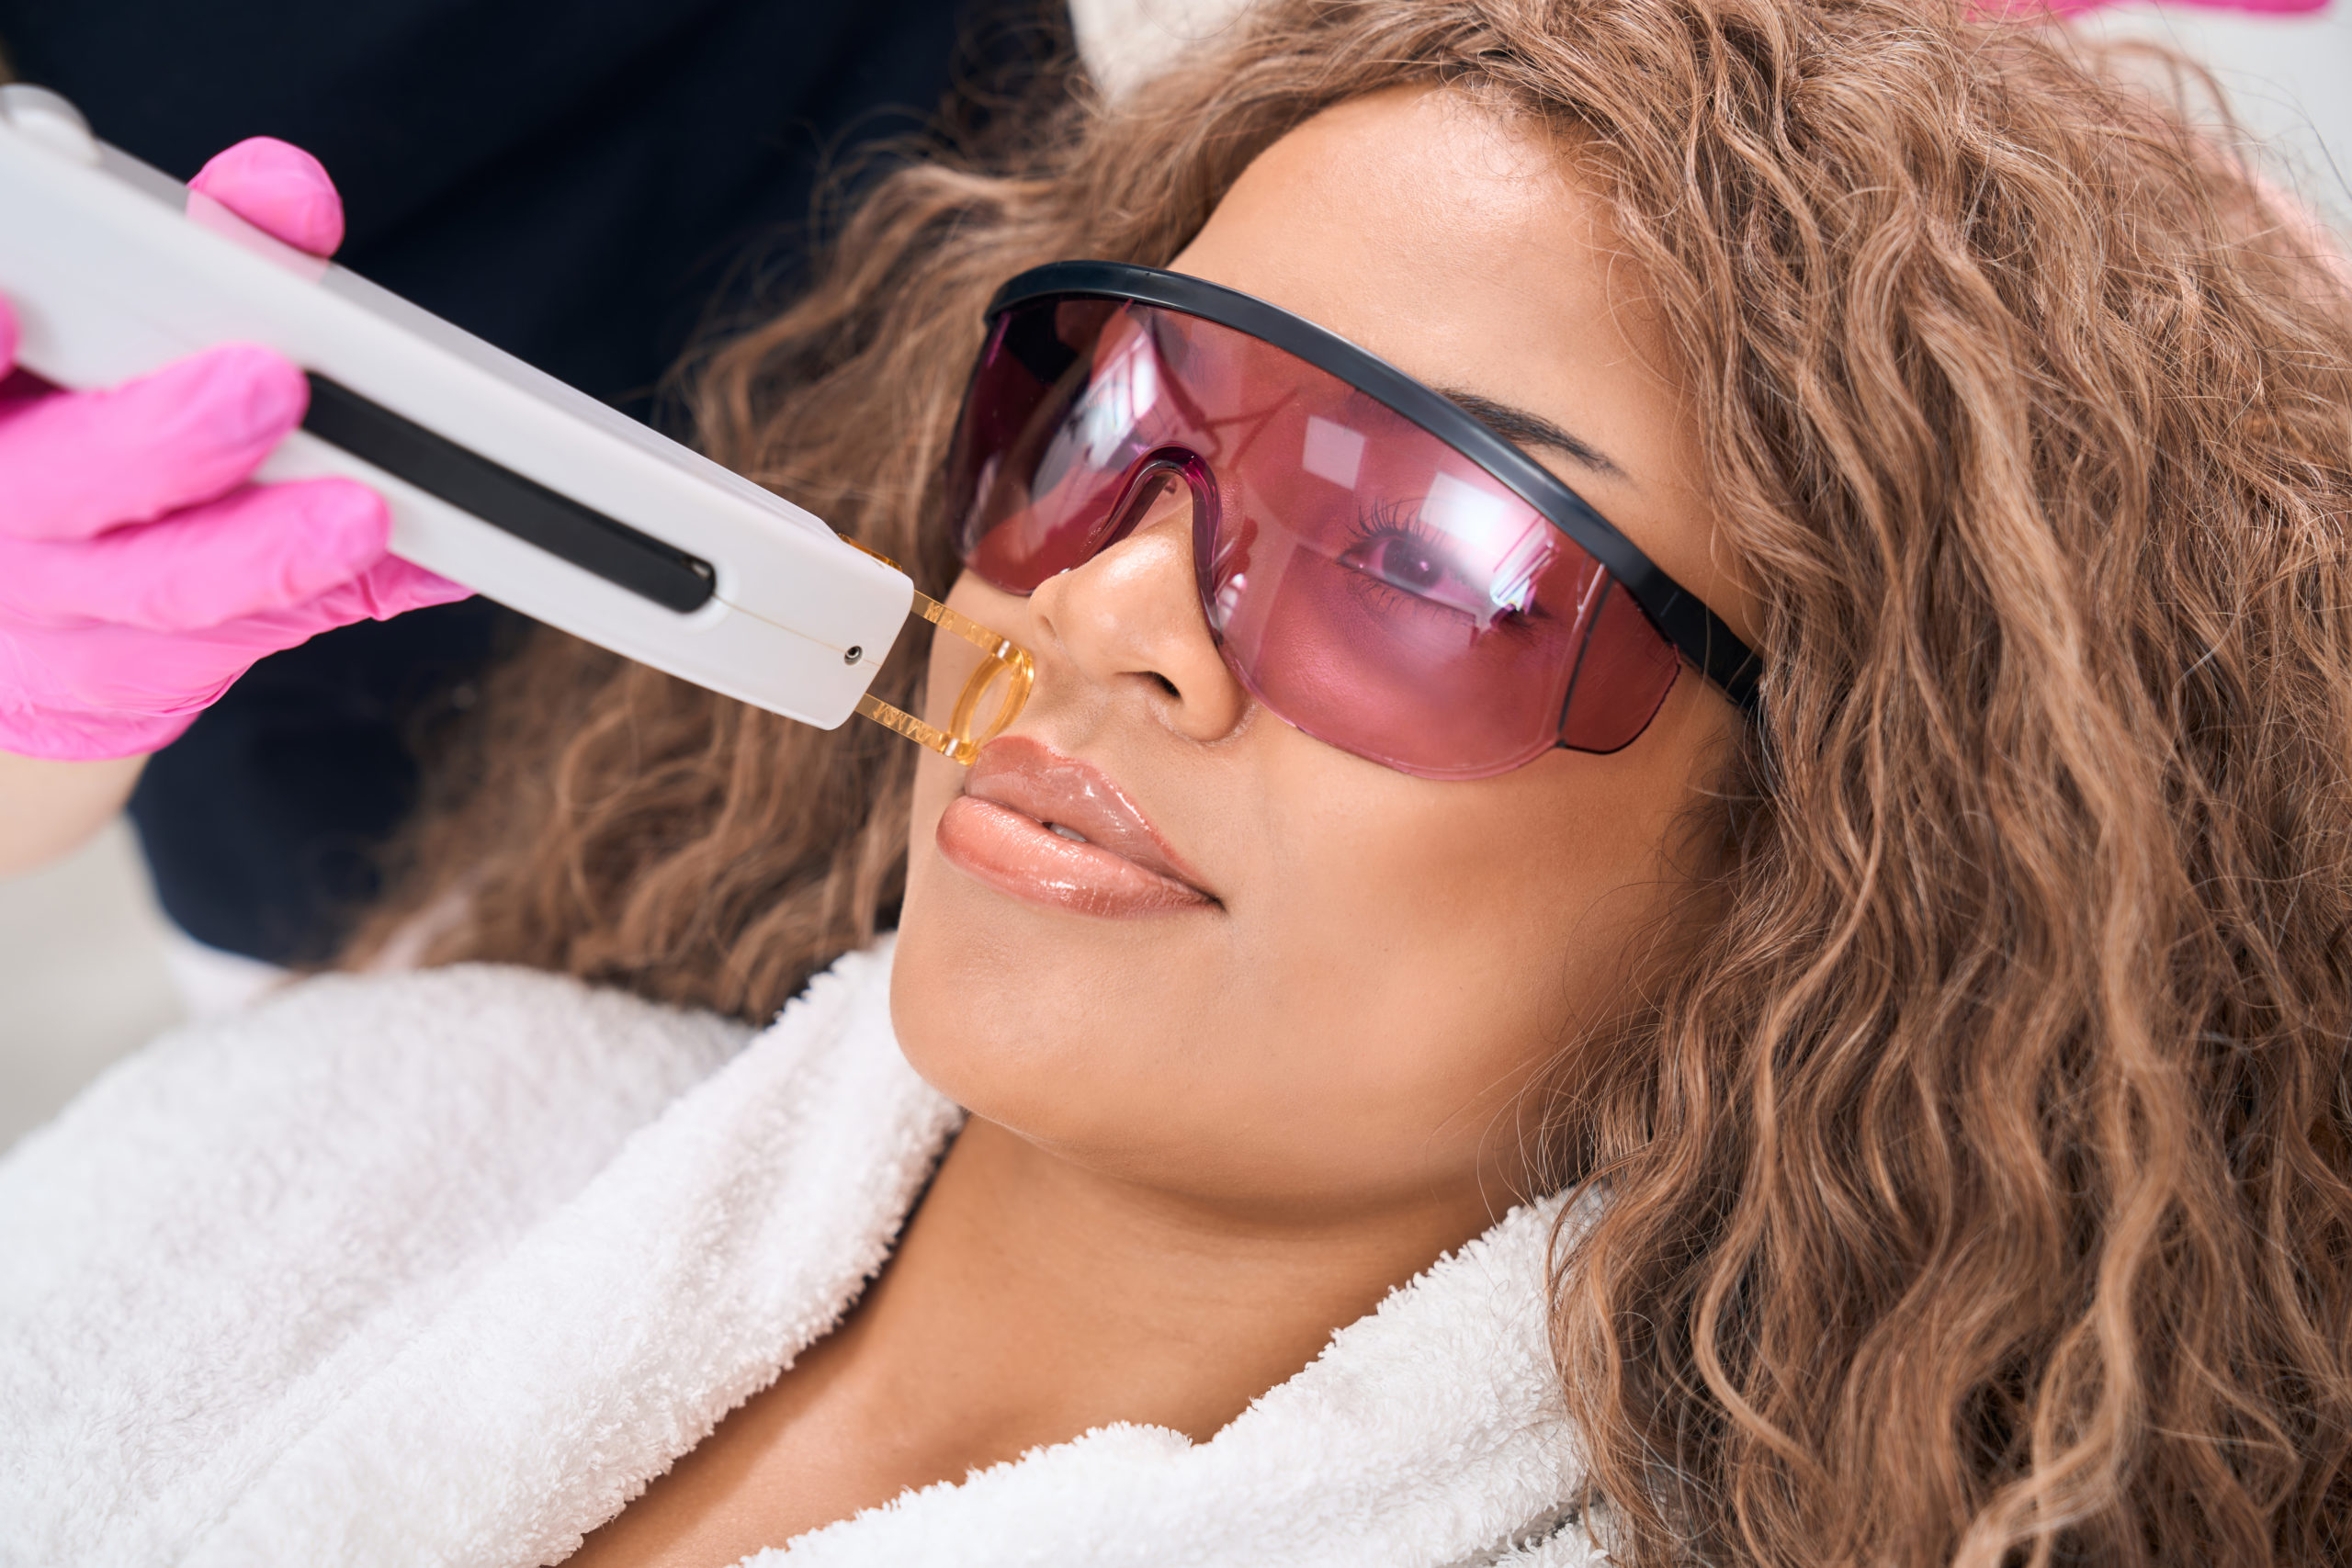 Woman on mustache laser hair removal procedure